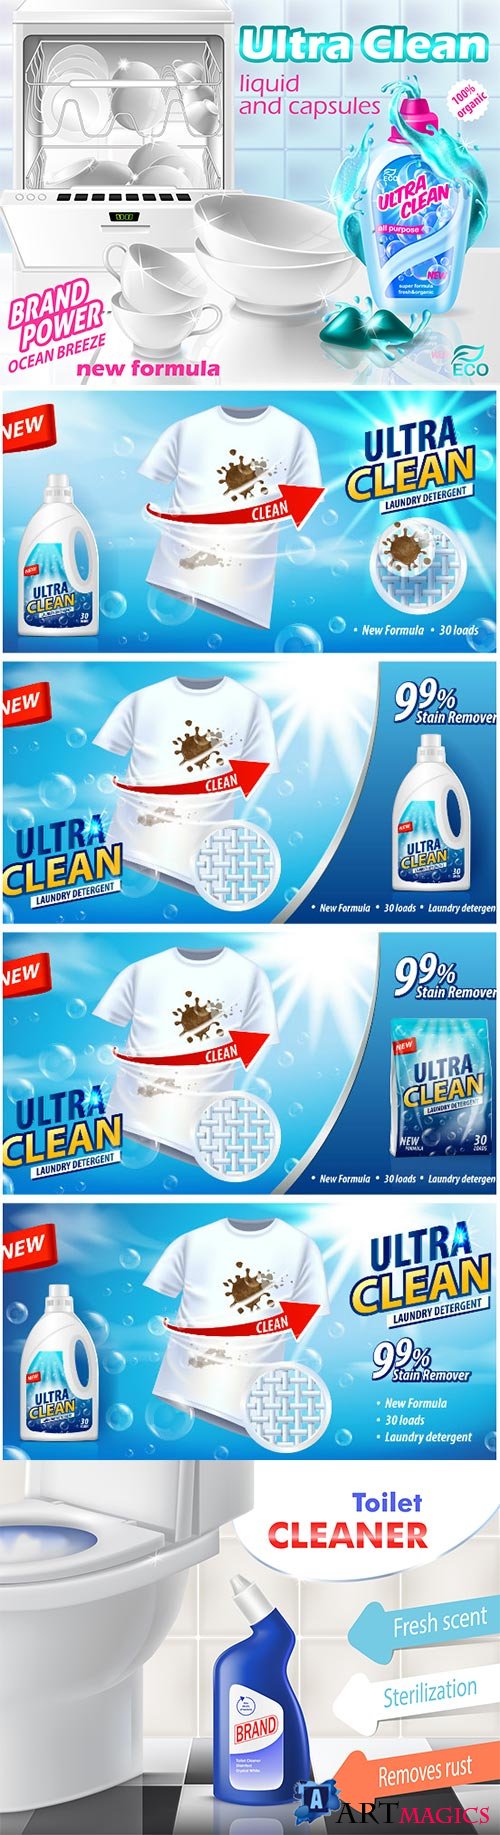 Mockup for brand advertising vector design, laundry detergent, liquid cleaner and capsules for dishwasher